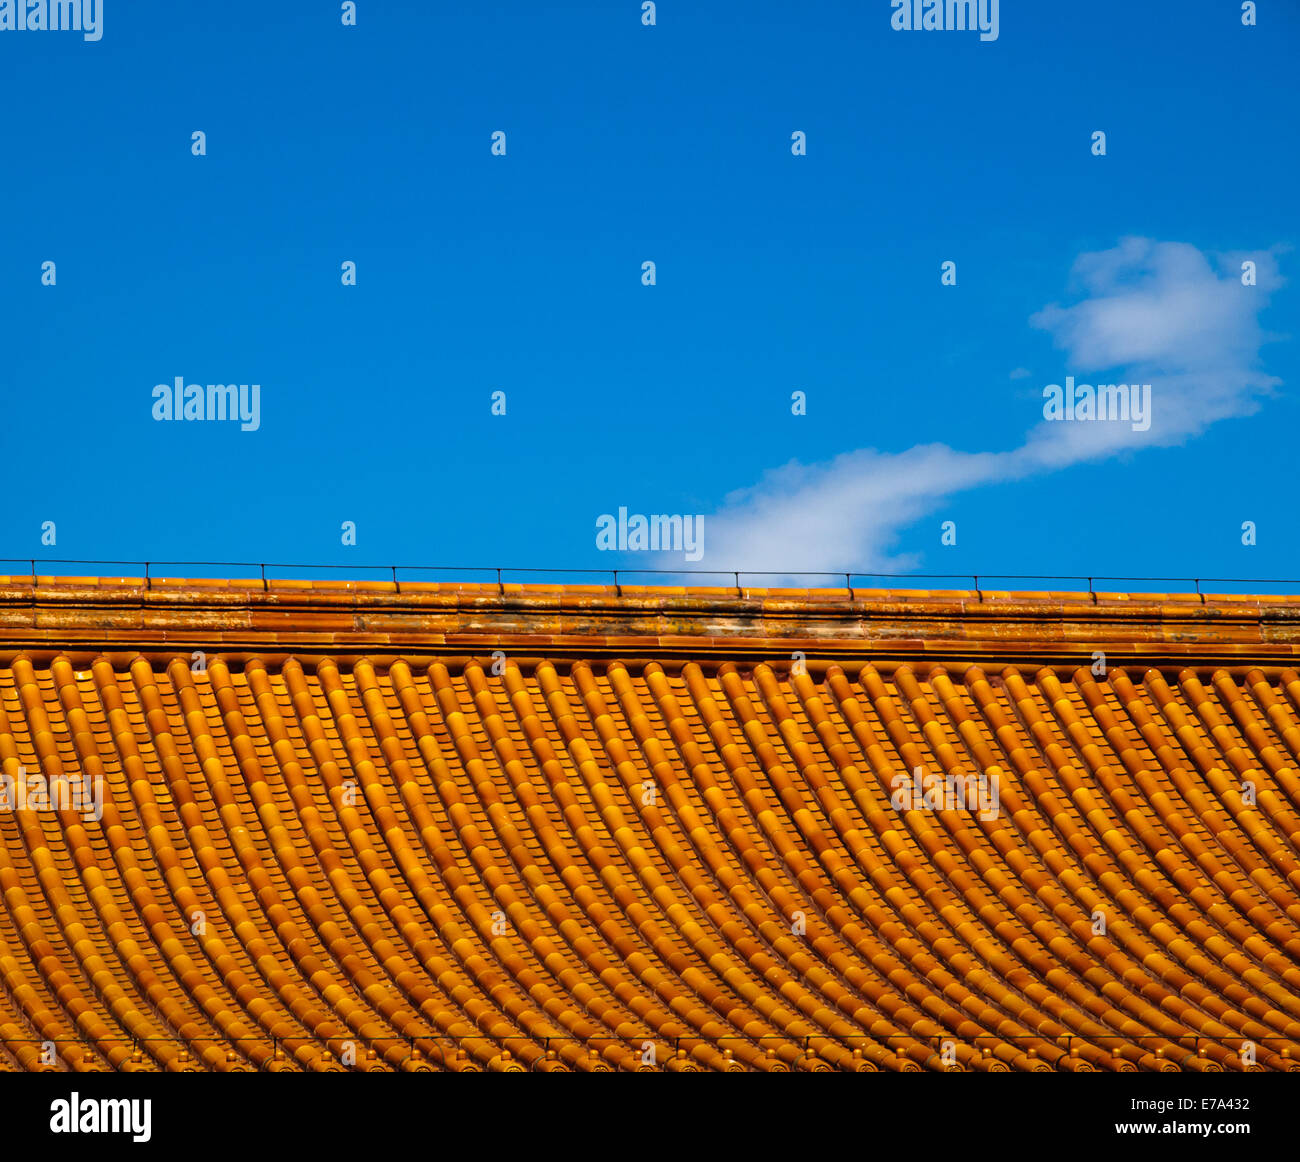 Orange, tiled Chinese rooftops in the Forbidden City, Beijing, China Stock Photo